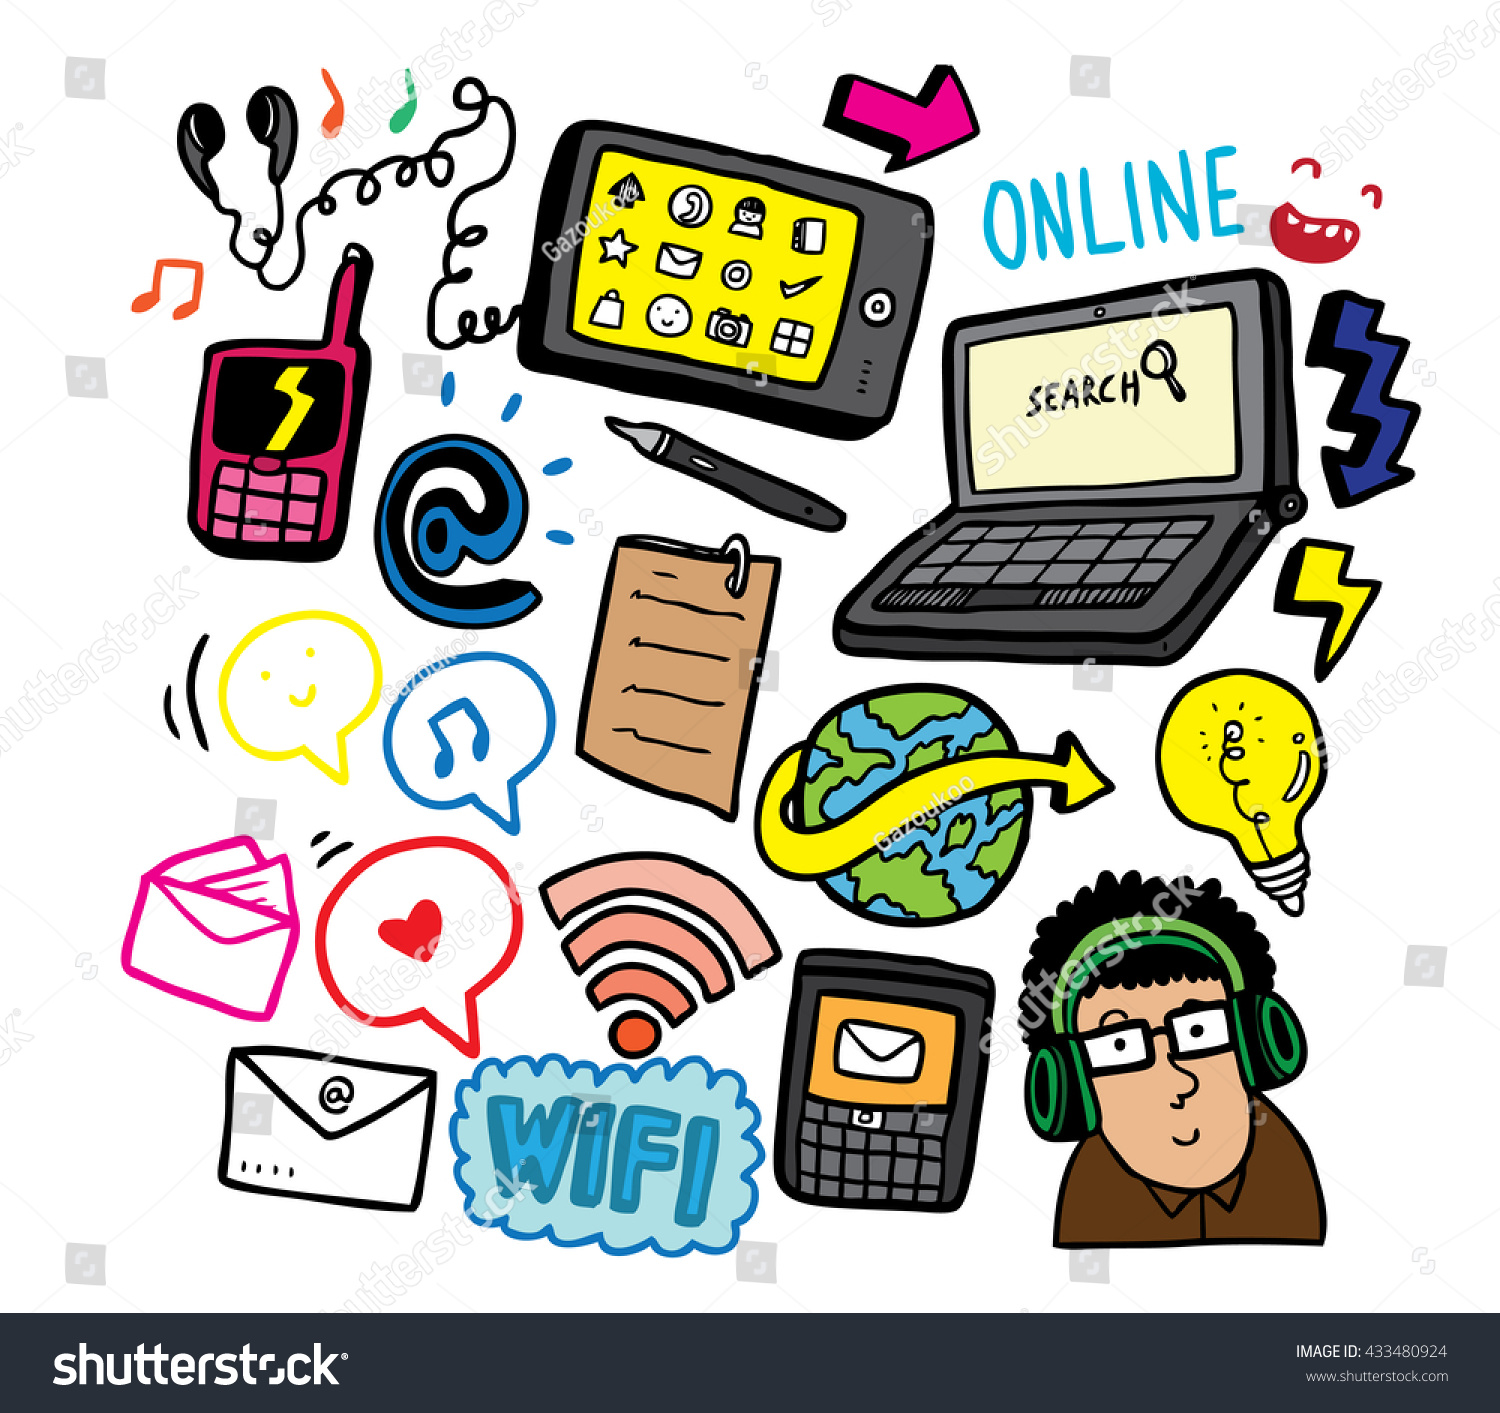 Information Technology Doodle Stock Vector Royalty Free 433480924